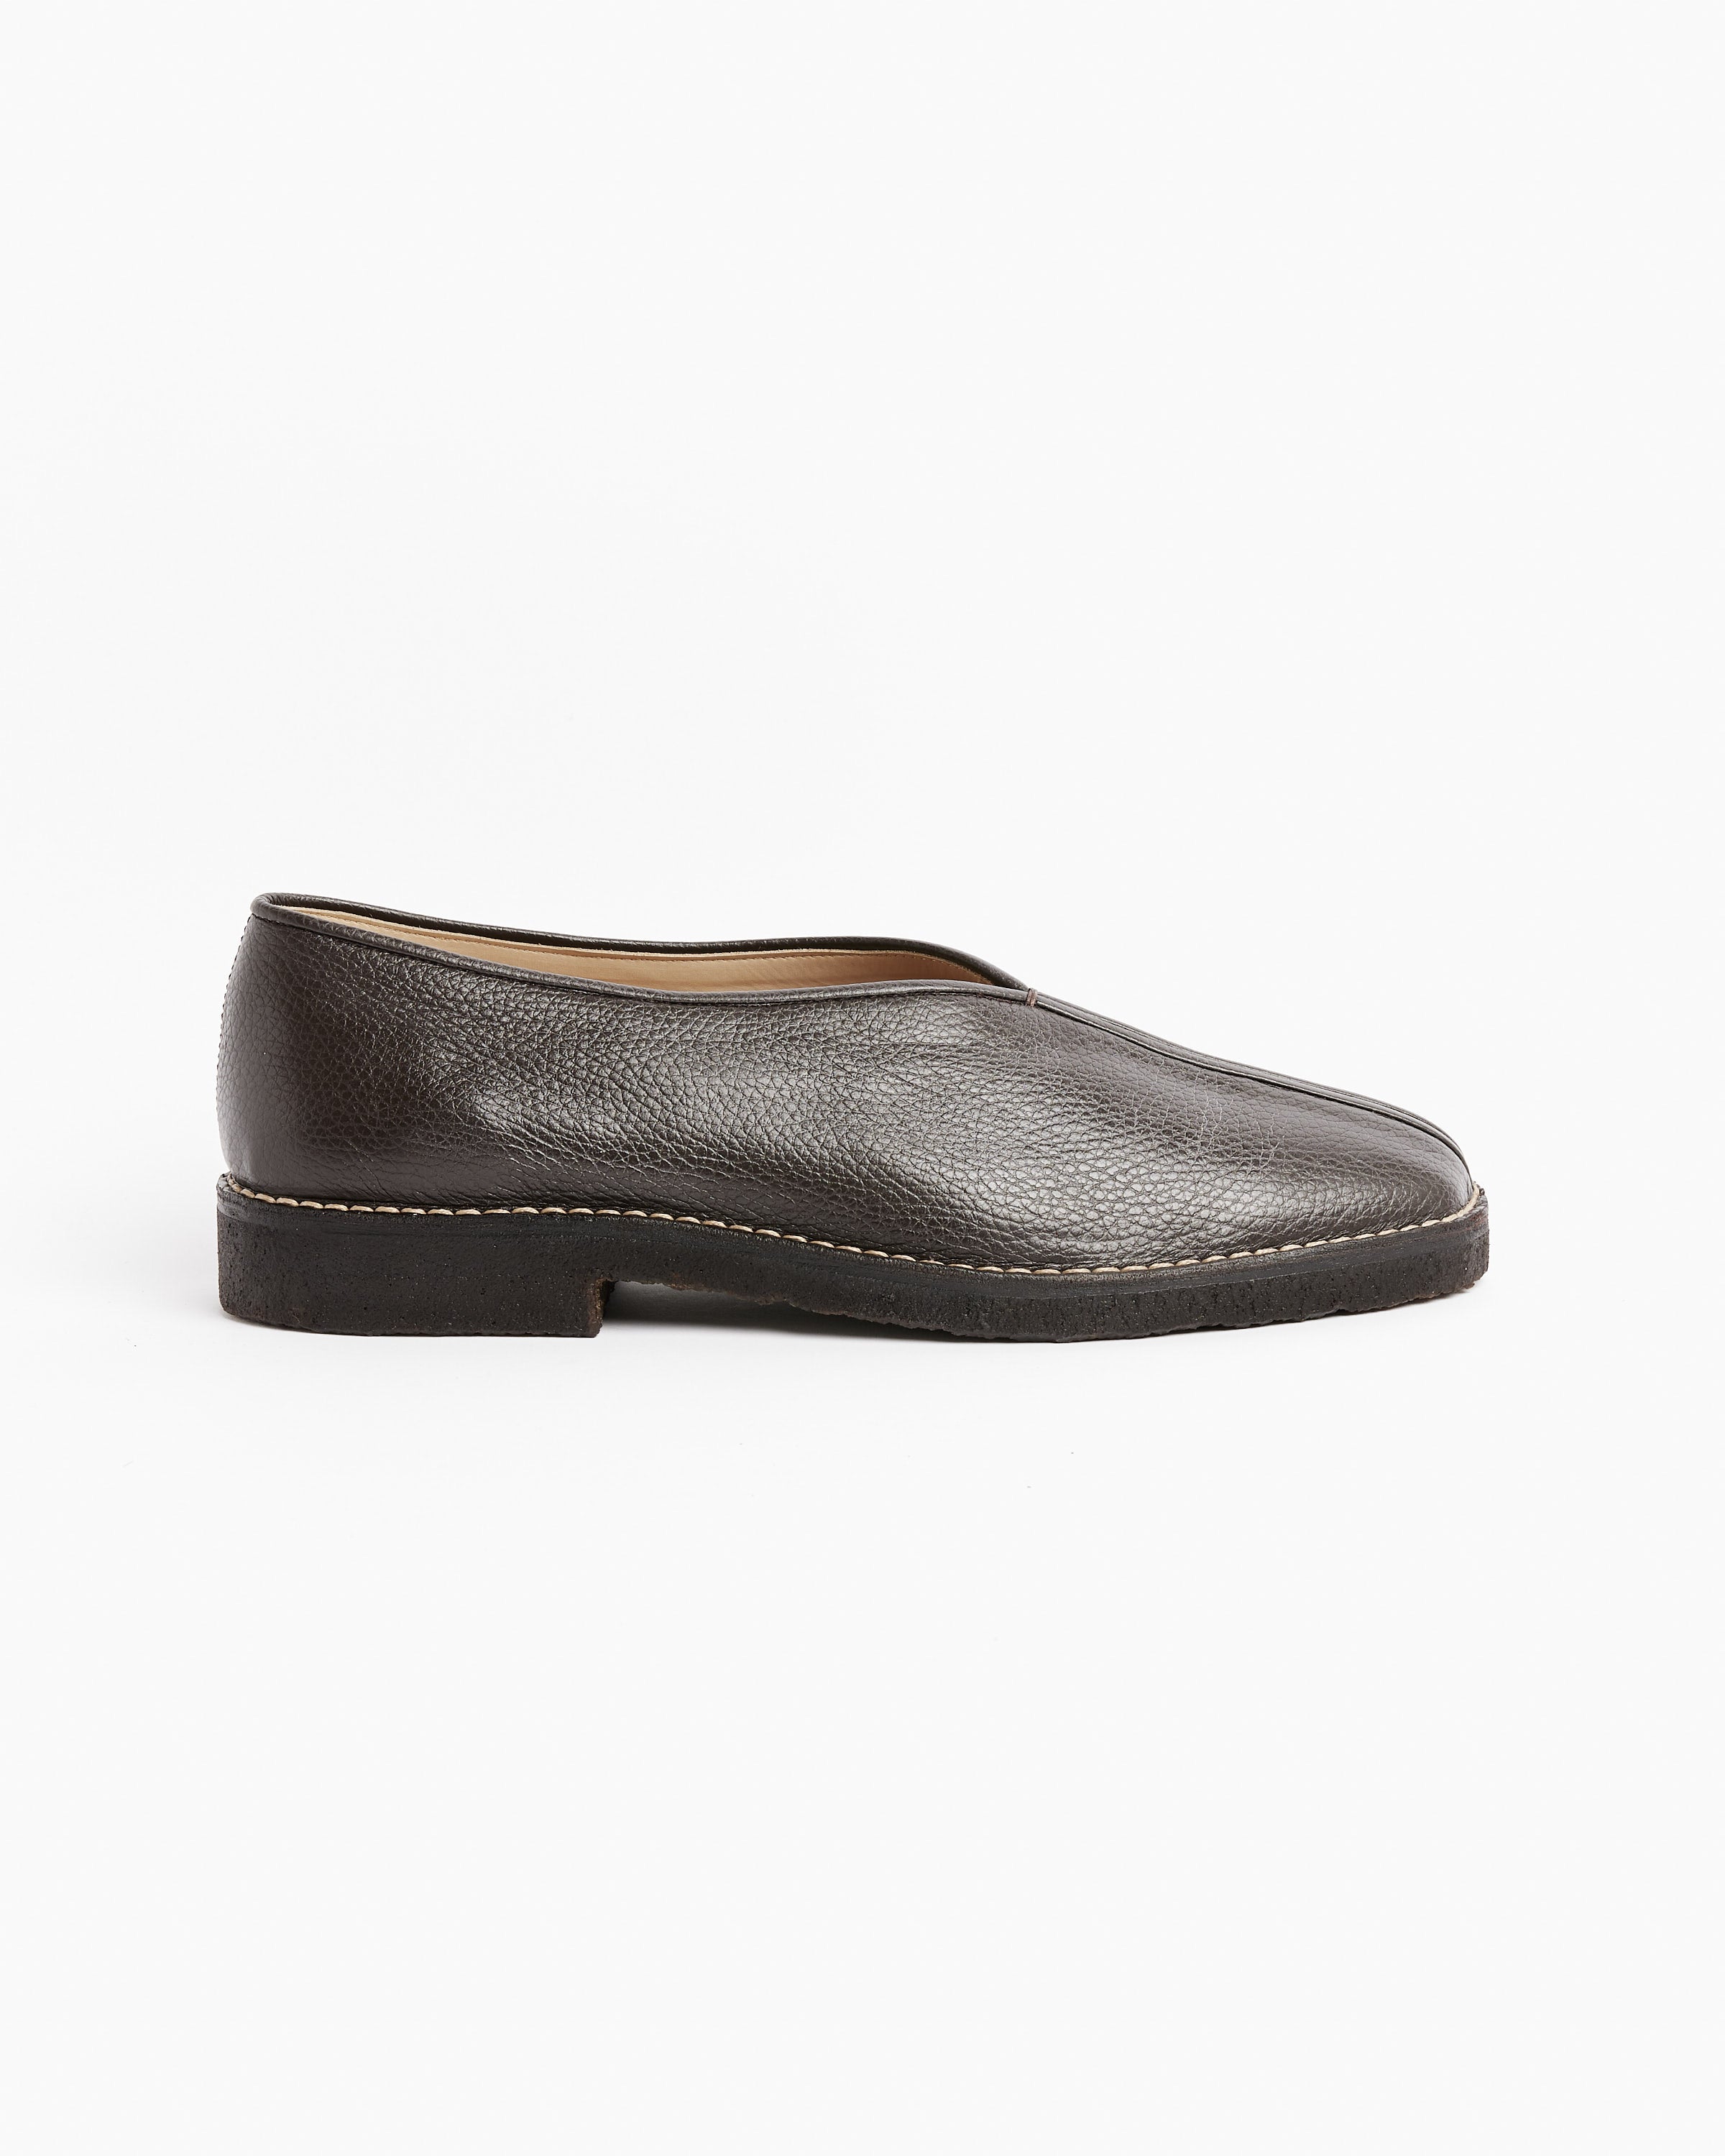 Lemaire Black Flat Piped Slippers